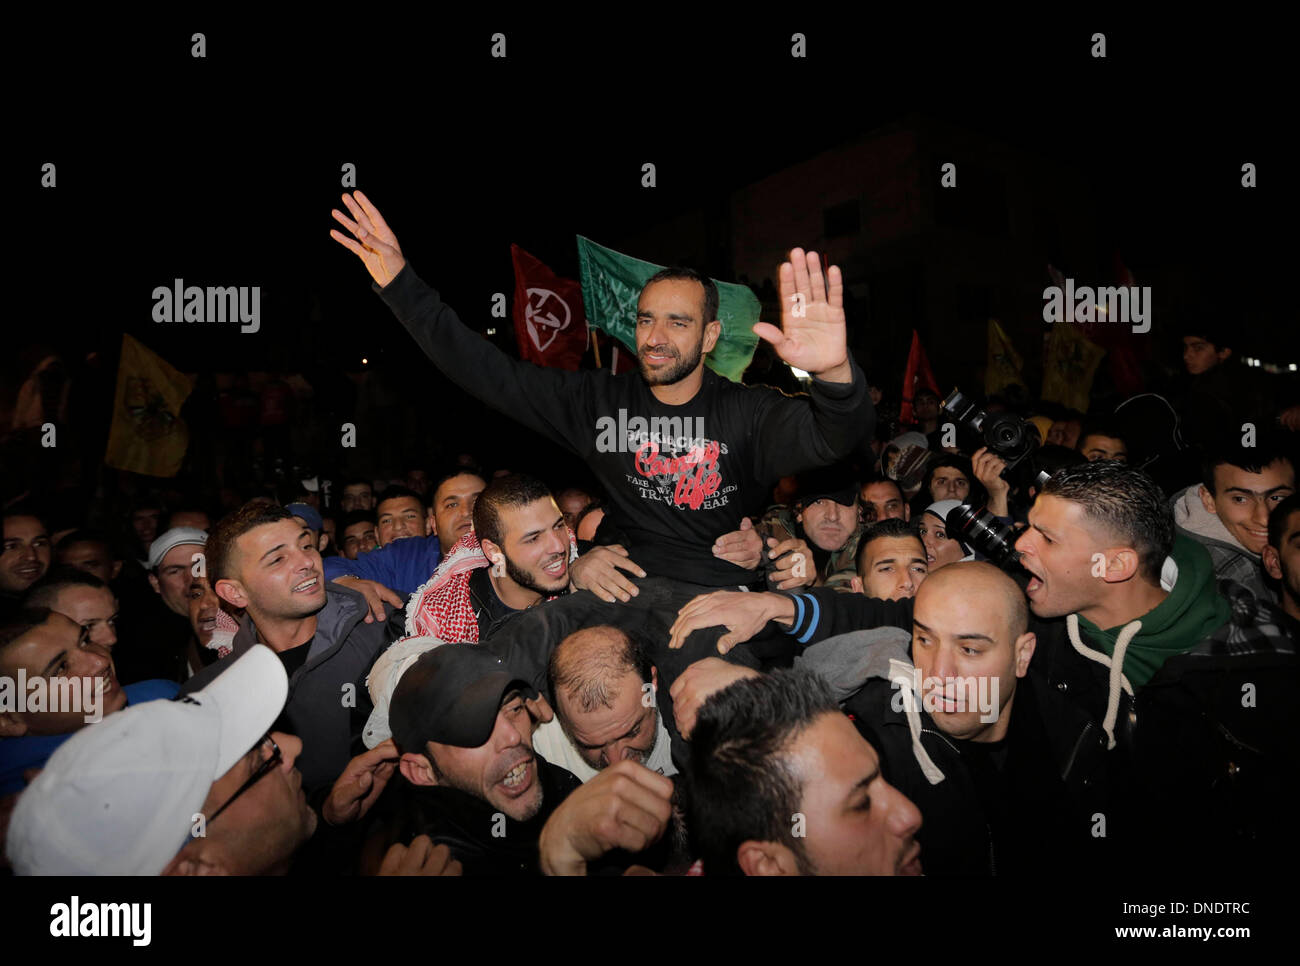 Jerusalem. 23rd Dec, 2013. Palestinians carry released Palestinian prisoner Samer Essawi (C) as they celebrate in Essaweyeh town in eastern Jerusalem, on Dec. 23, 2013. Israeli authorities on Monday released Samer Essawi, a Palestinian prisoner who went on the longest hunger strike against Israel, after more than 17 months in jail, his families told reporters. Credit:  Muammar Awad/Xinhua/Alamy Live News Stock Photo